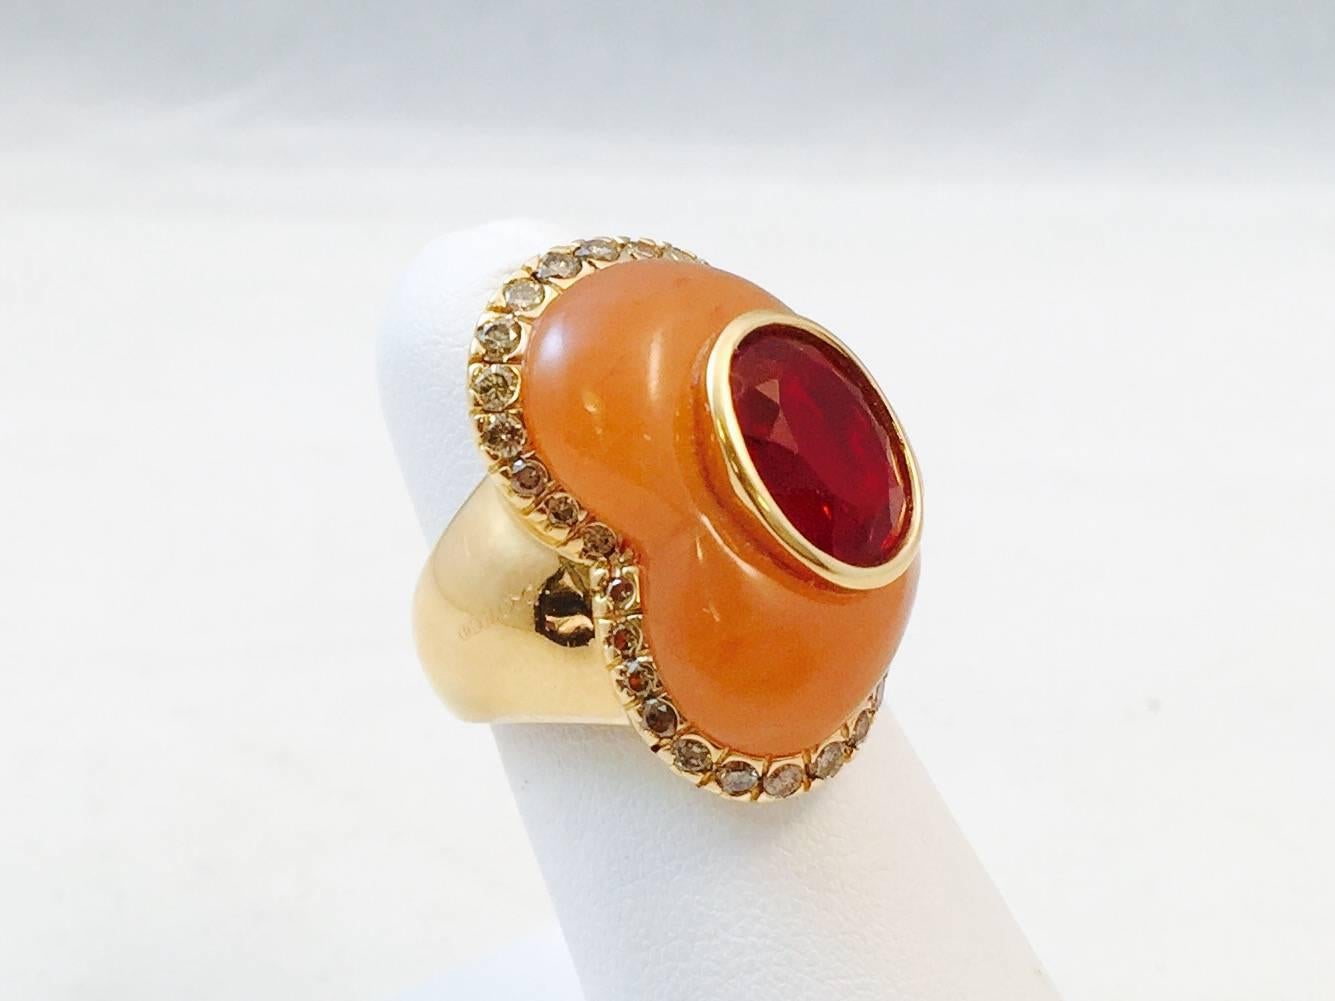 Old world jewelry craftsmanship coupled with innovative design is the hallmark of Oro Trend jewelry.  Masterfully crafted in Valenza, Italy, where 100% of their products originate.  A sculptural, offset heart shape depicted in carved peach agate is